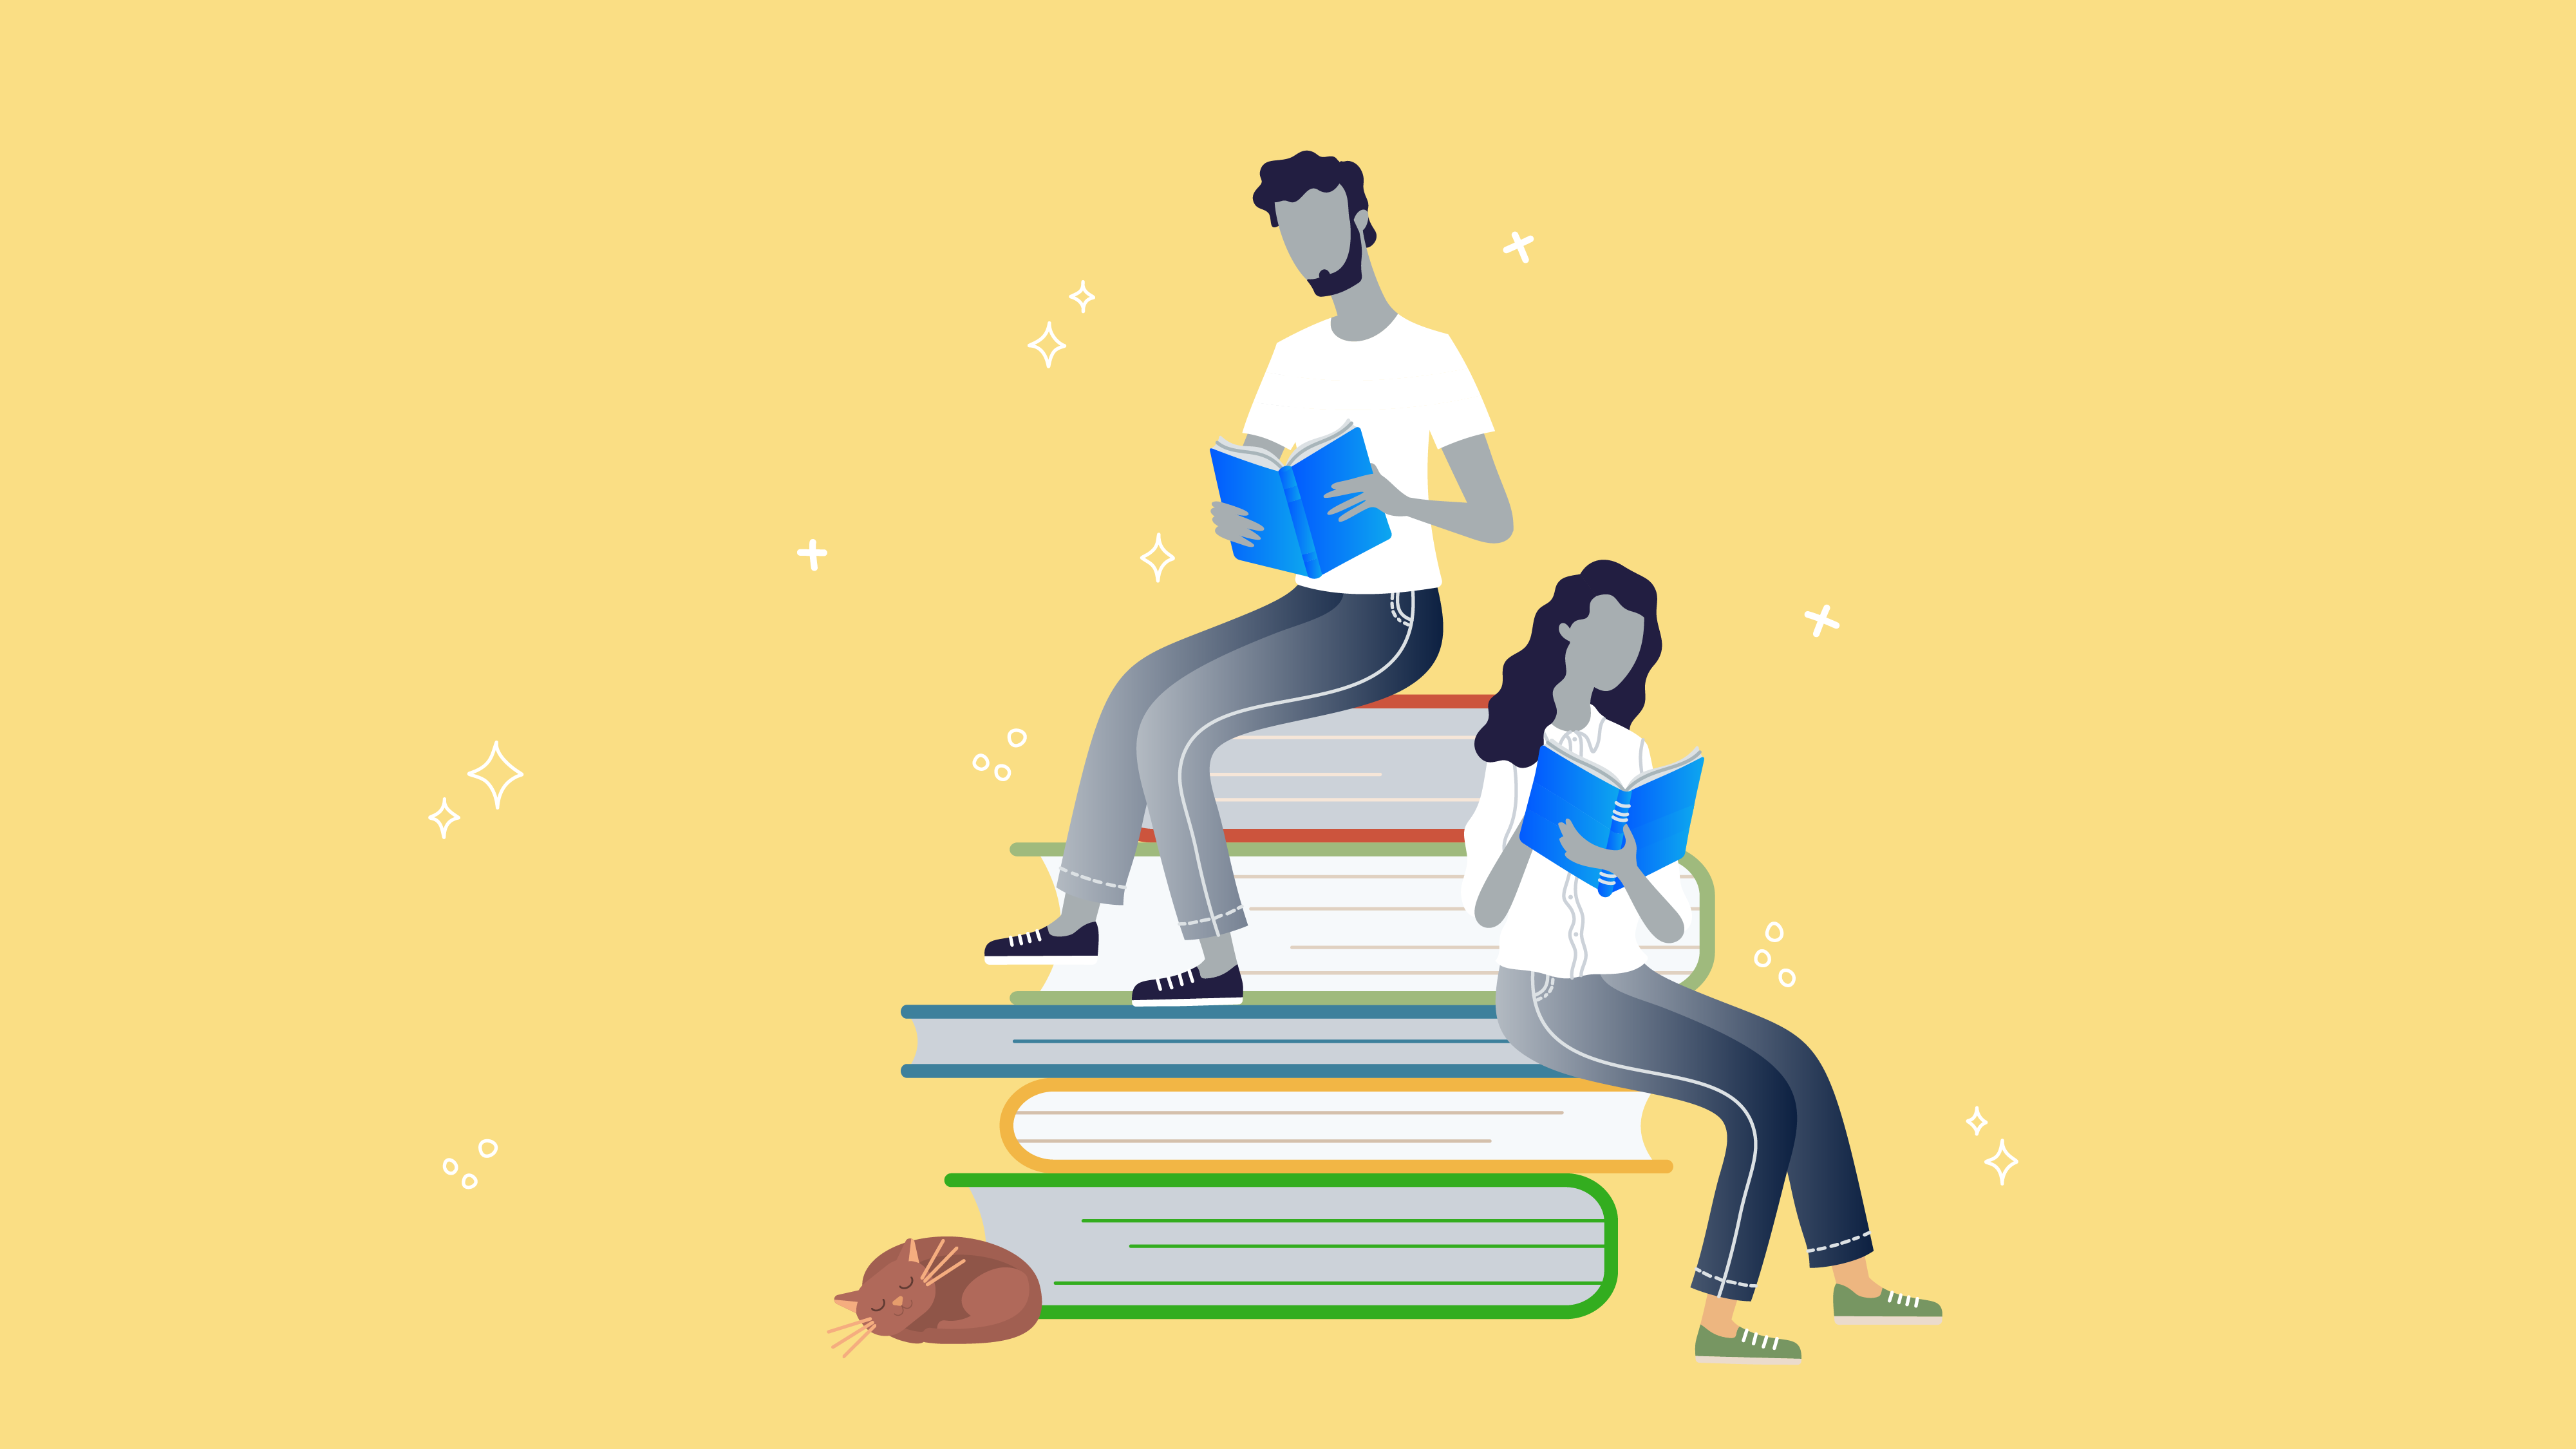 Illustration of two people sitting on a large pile of books.